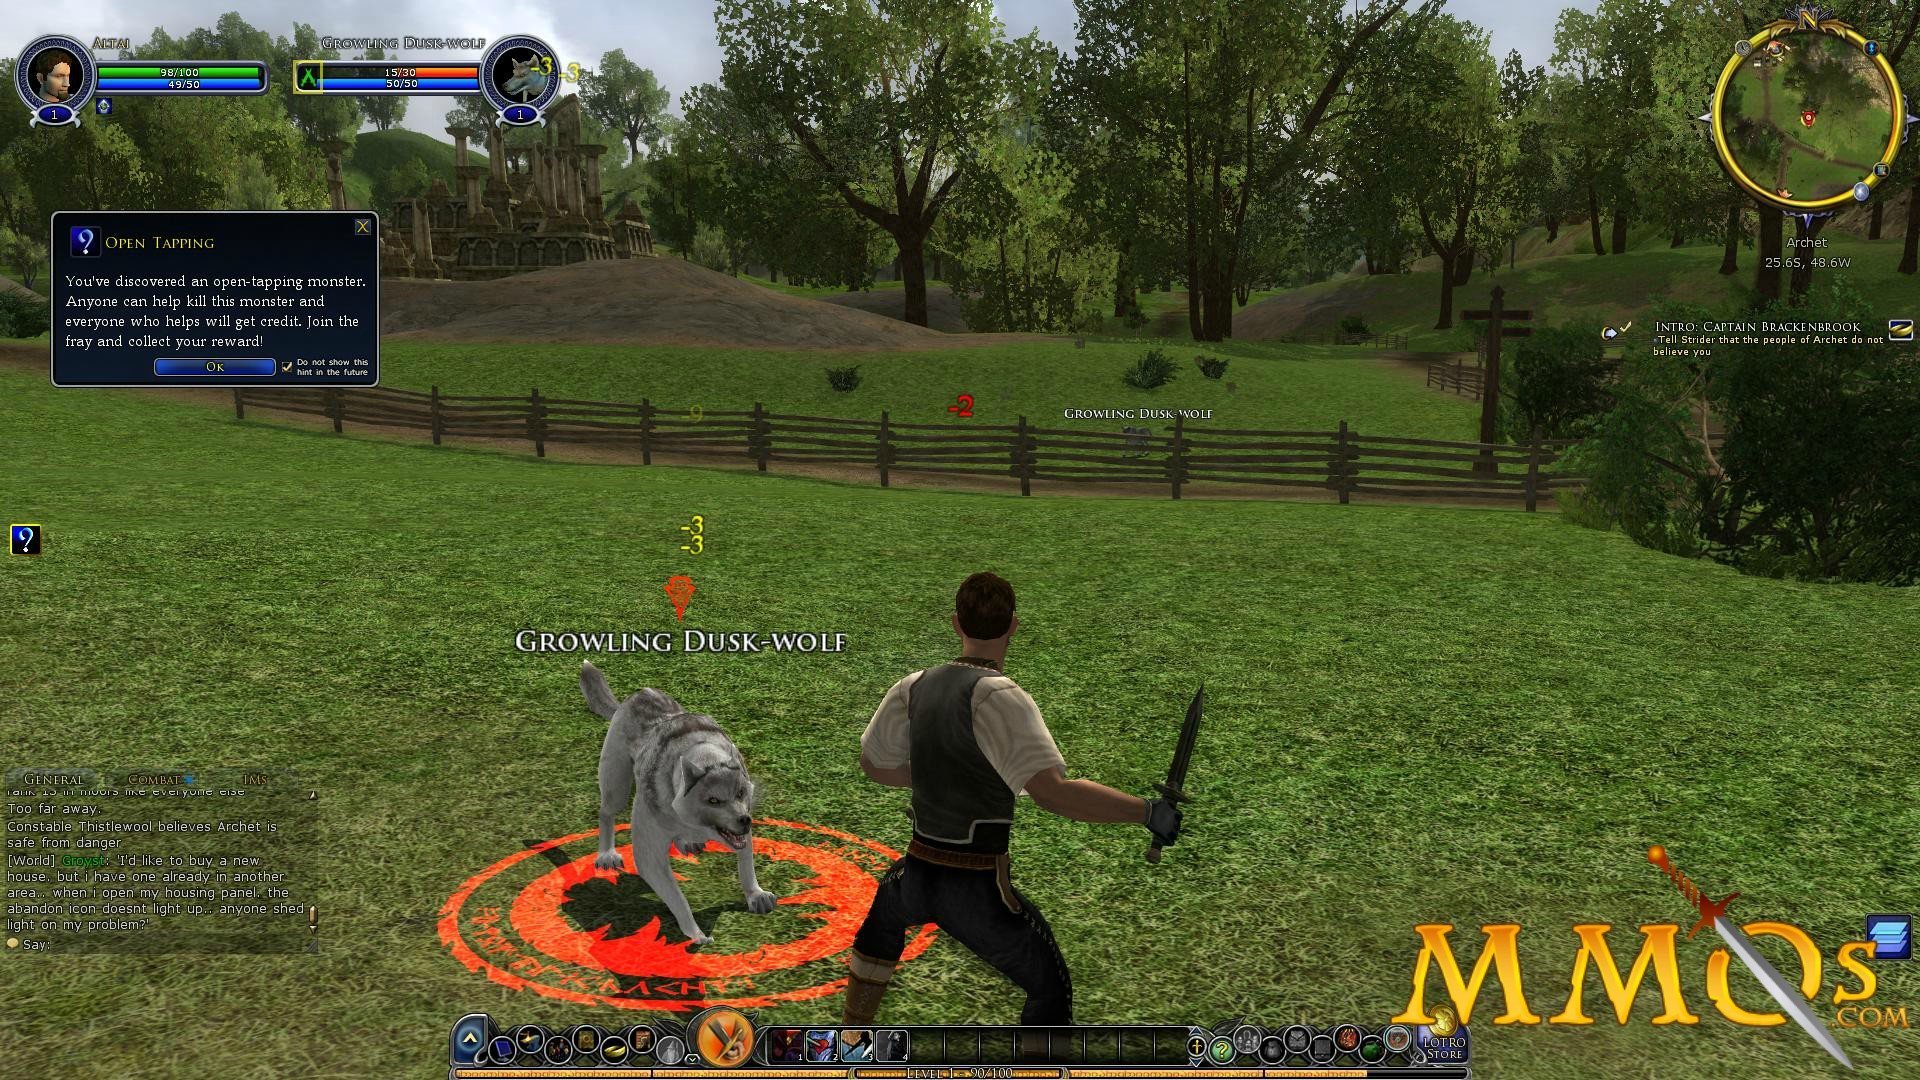 Cord of the Rings - The Lord of the Rings Online, The Lord of the Rings  Online was live., By The Lord of the Rings Online